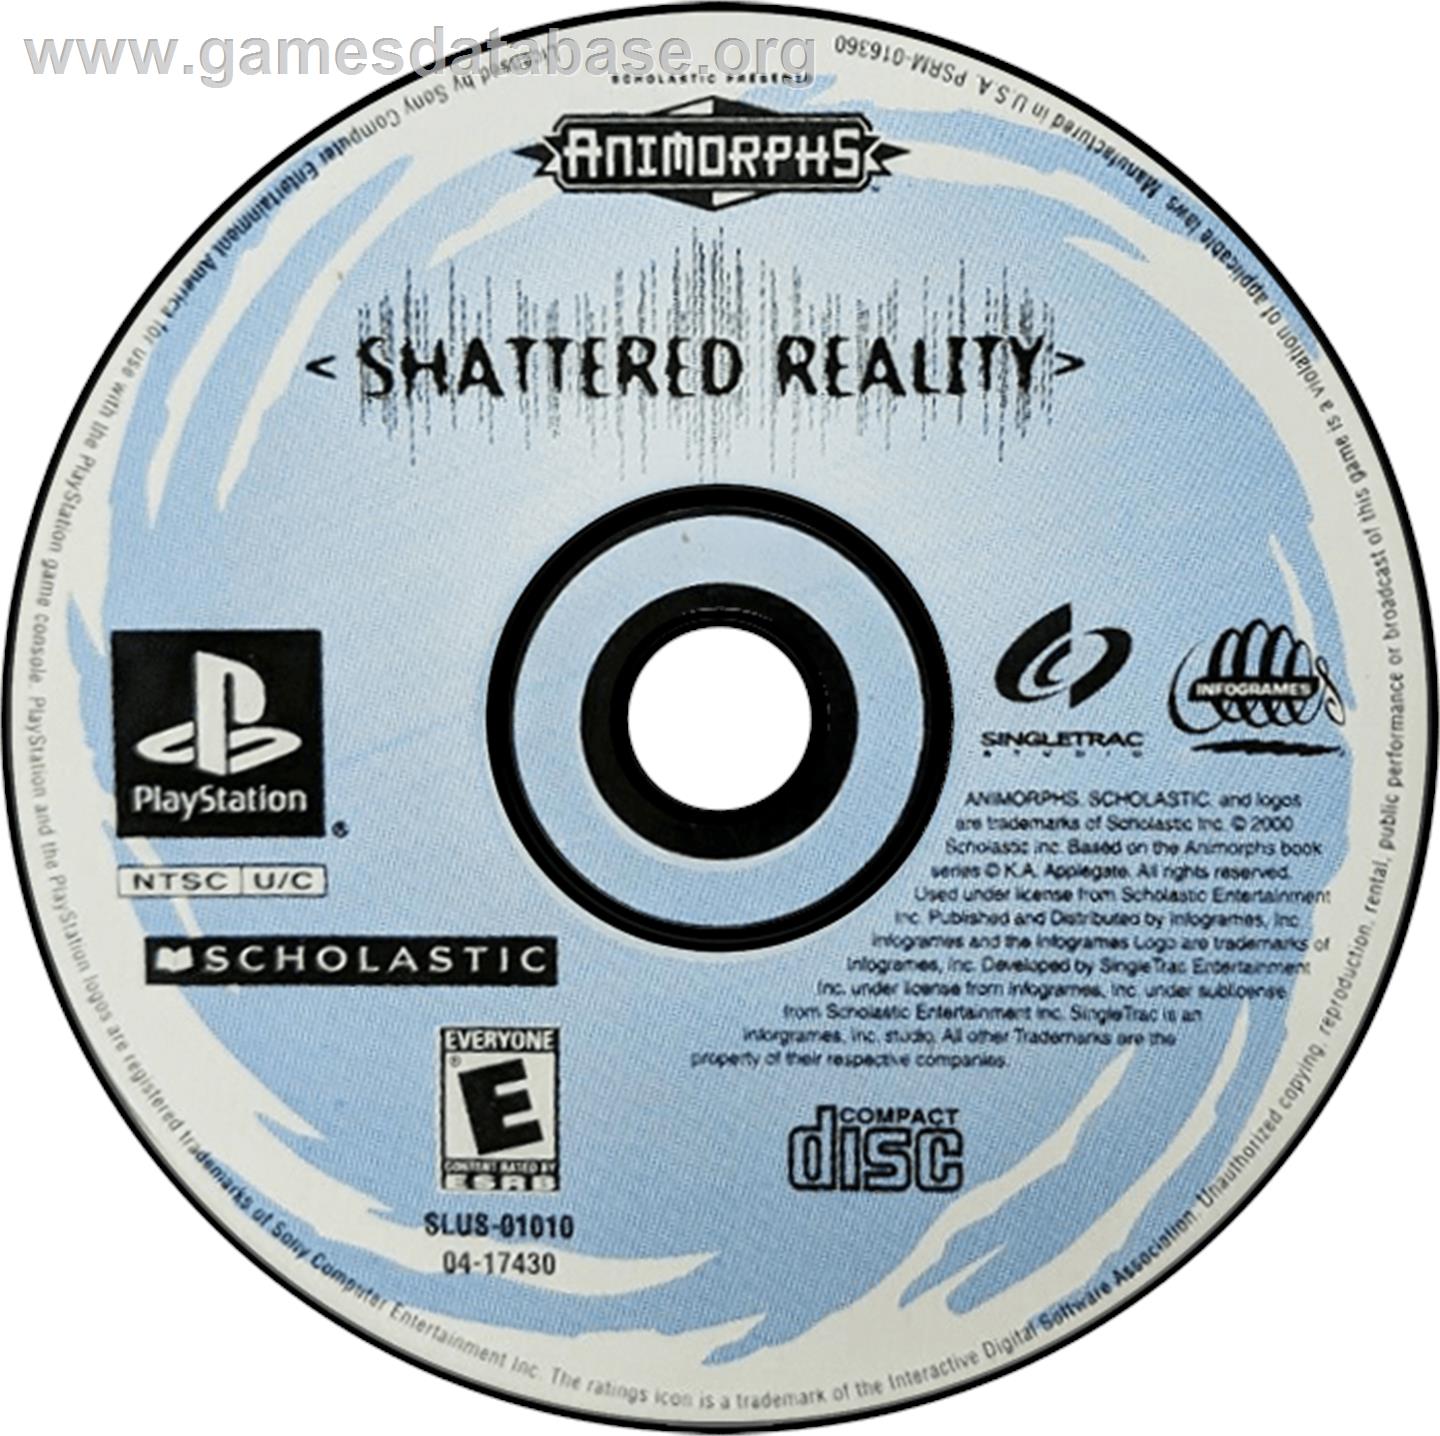 Animorphs: Shattered Reality - Sony Playstation - Artwork - Disc